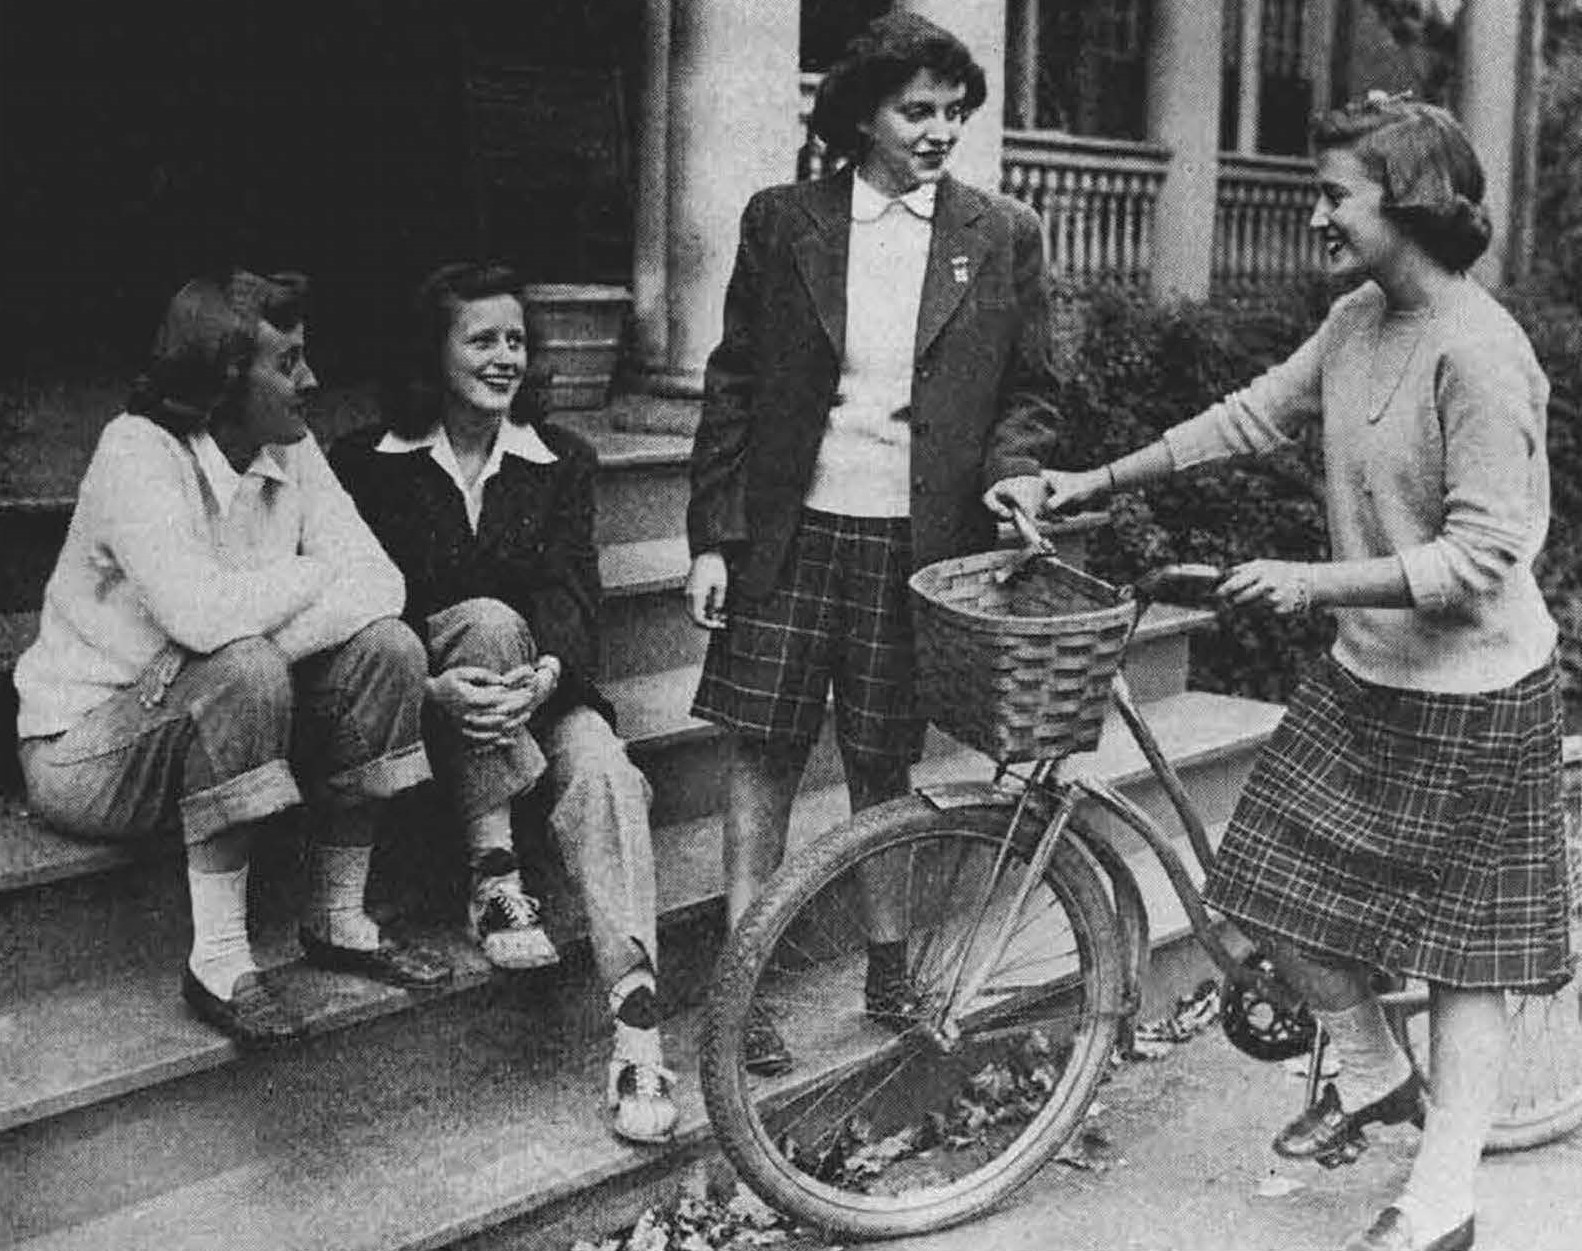 Black and white photo of four students, one in capris, one in slacks, one in shorts, and one in a skirt with a bicycle. They are smiling.